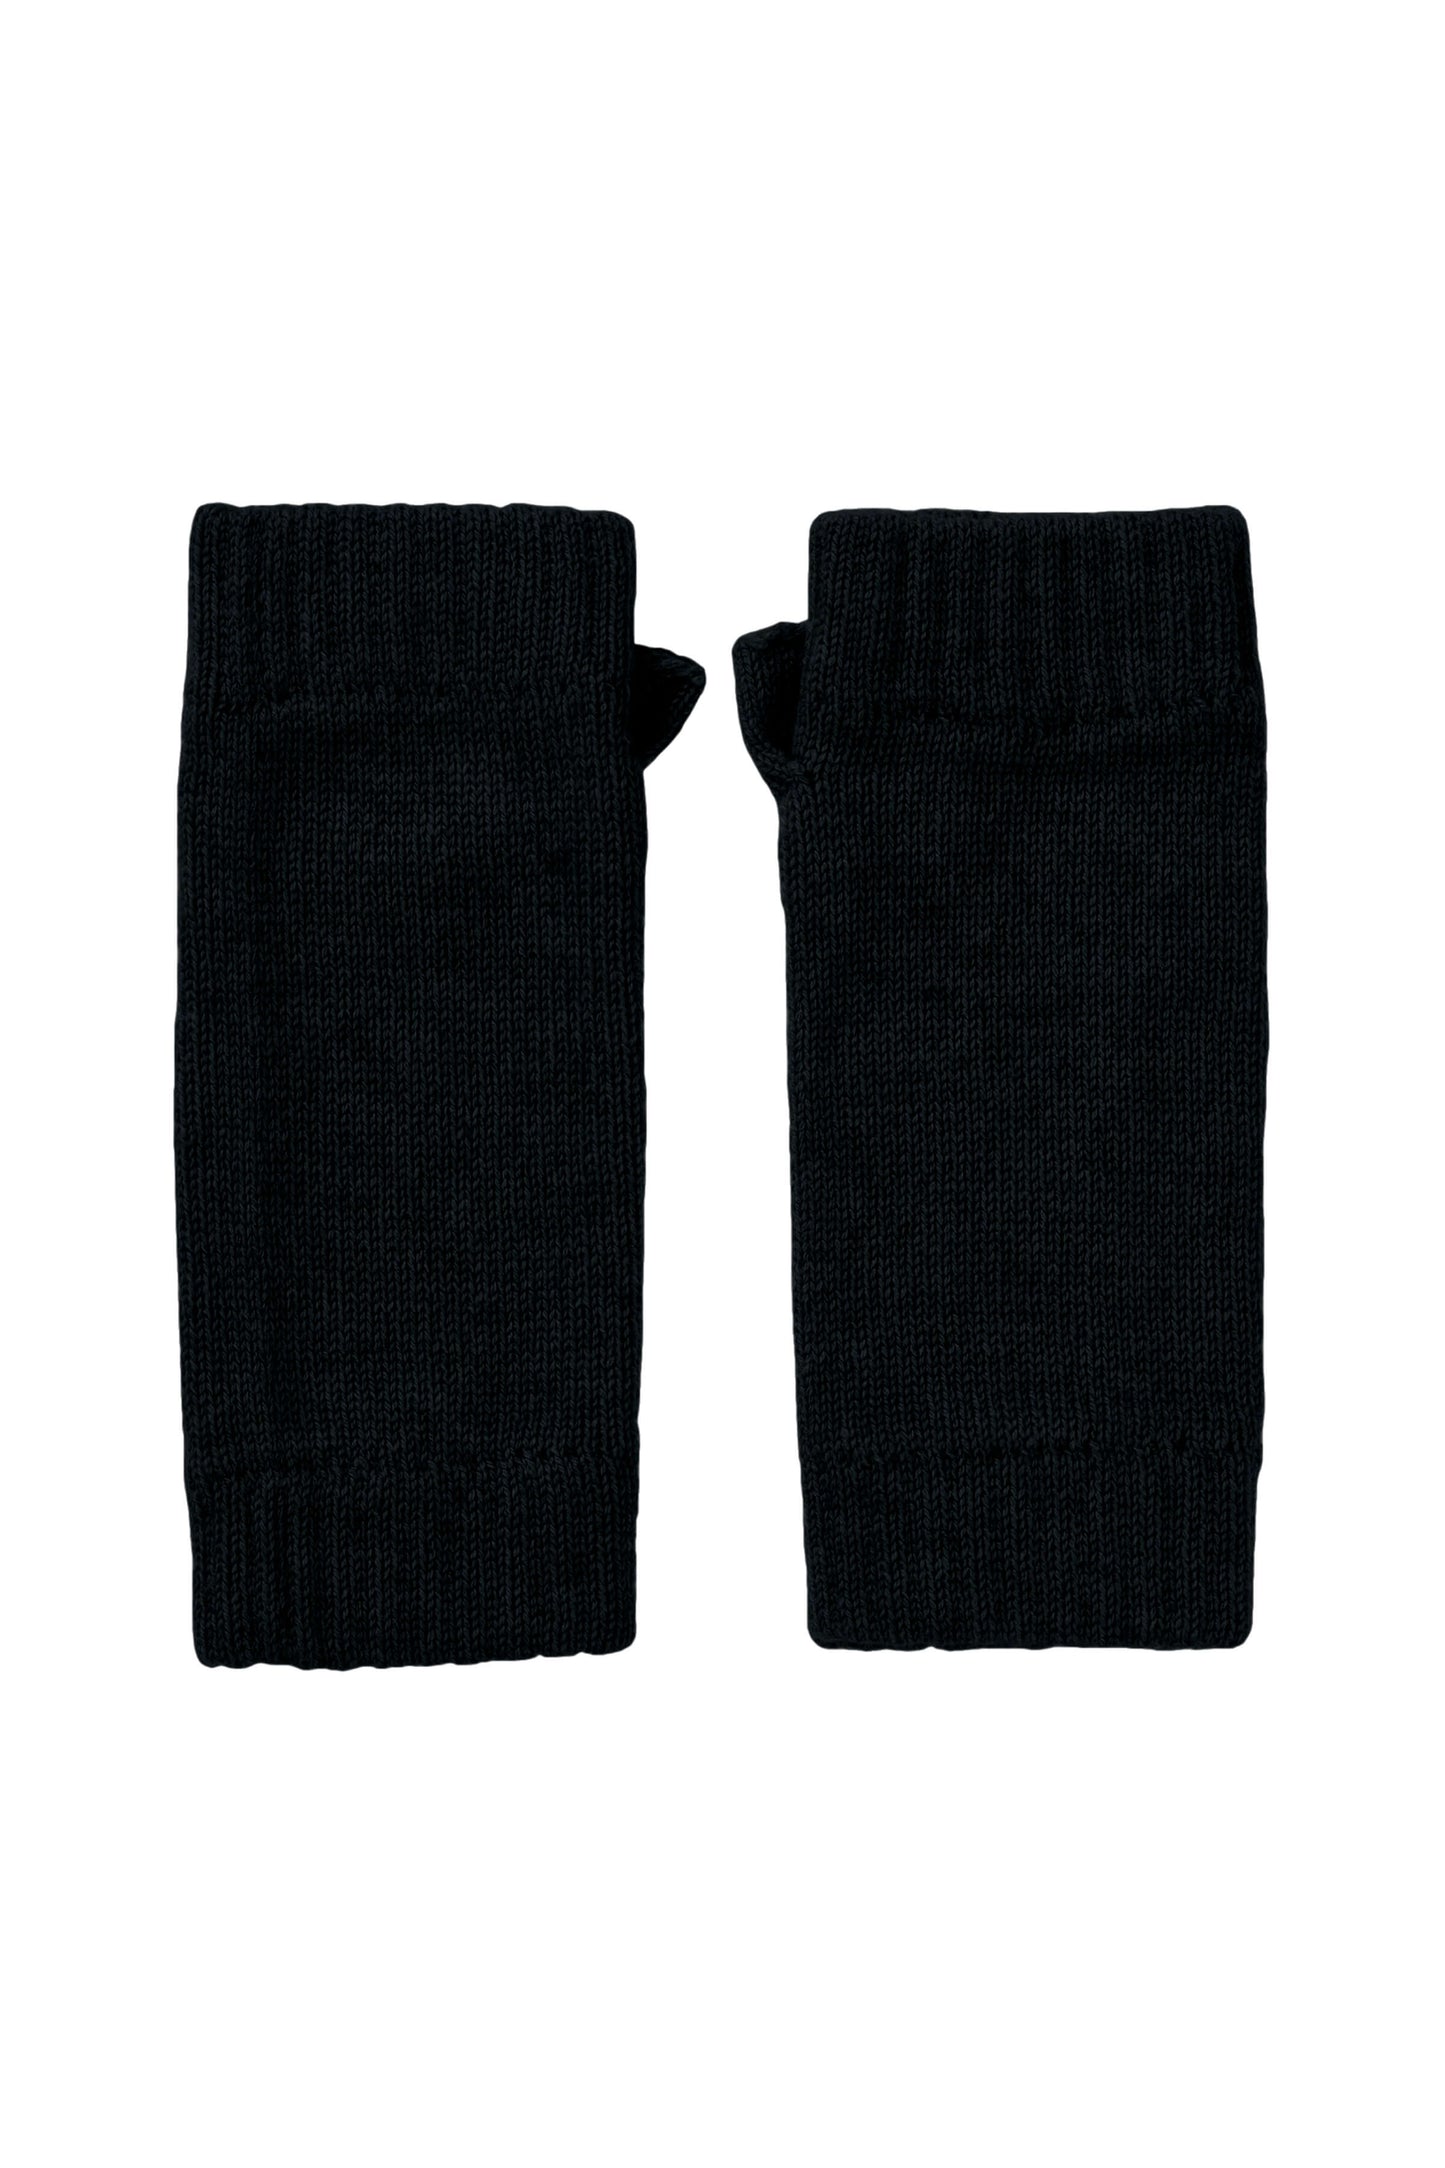 Johnstons of Elgin AW24 Knitted Accessory Black Cashmere Wrist Warmers HAD03215SA090055